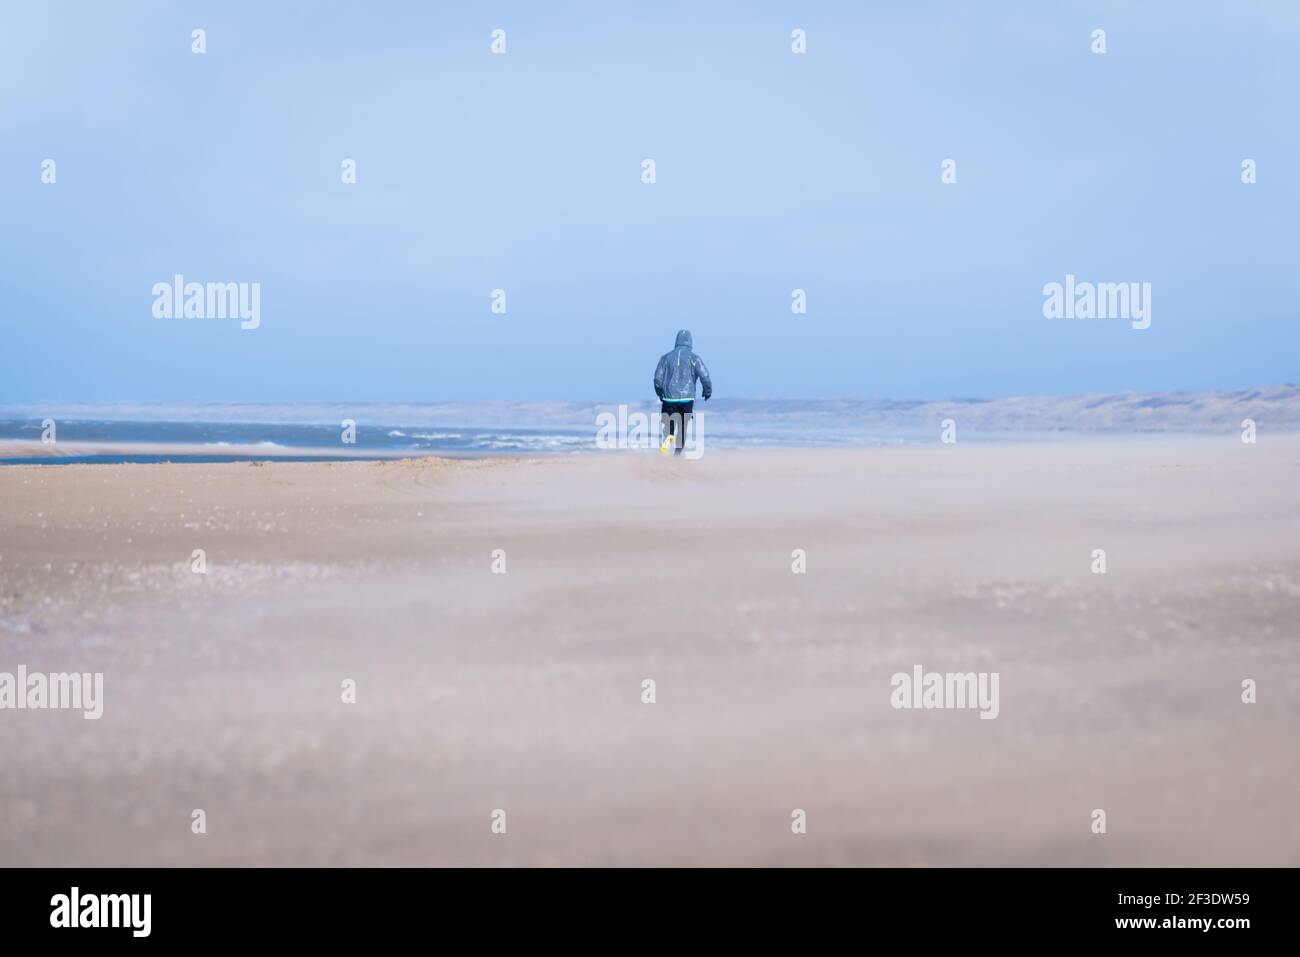 Low angle view on sandy sea coast. Alone person in warm clothing walking away in distance. Beach in low season. Stock Photo